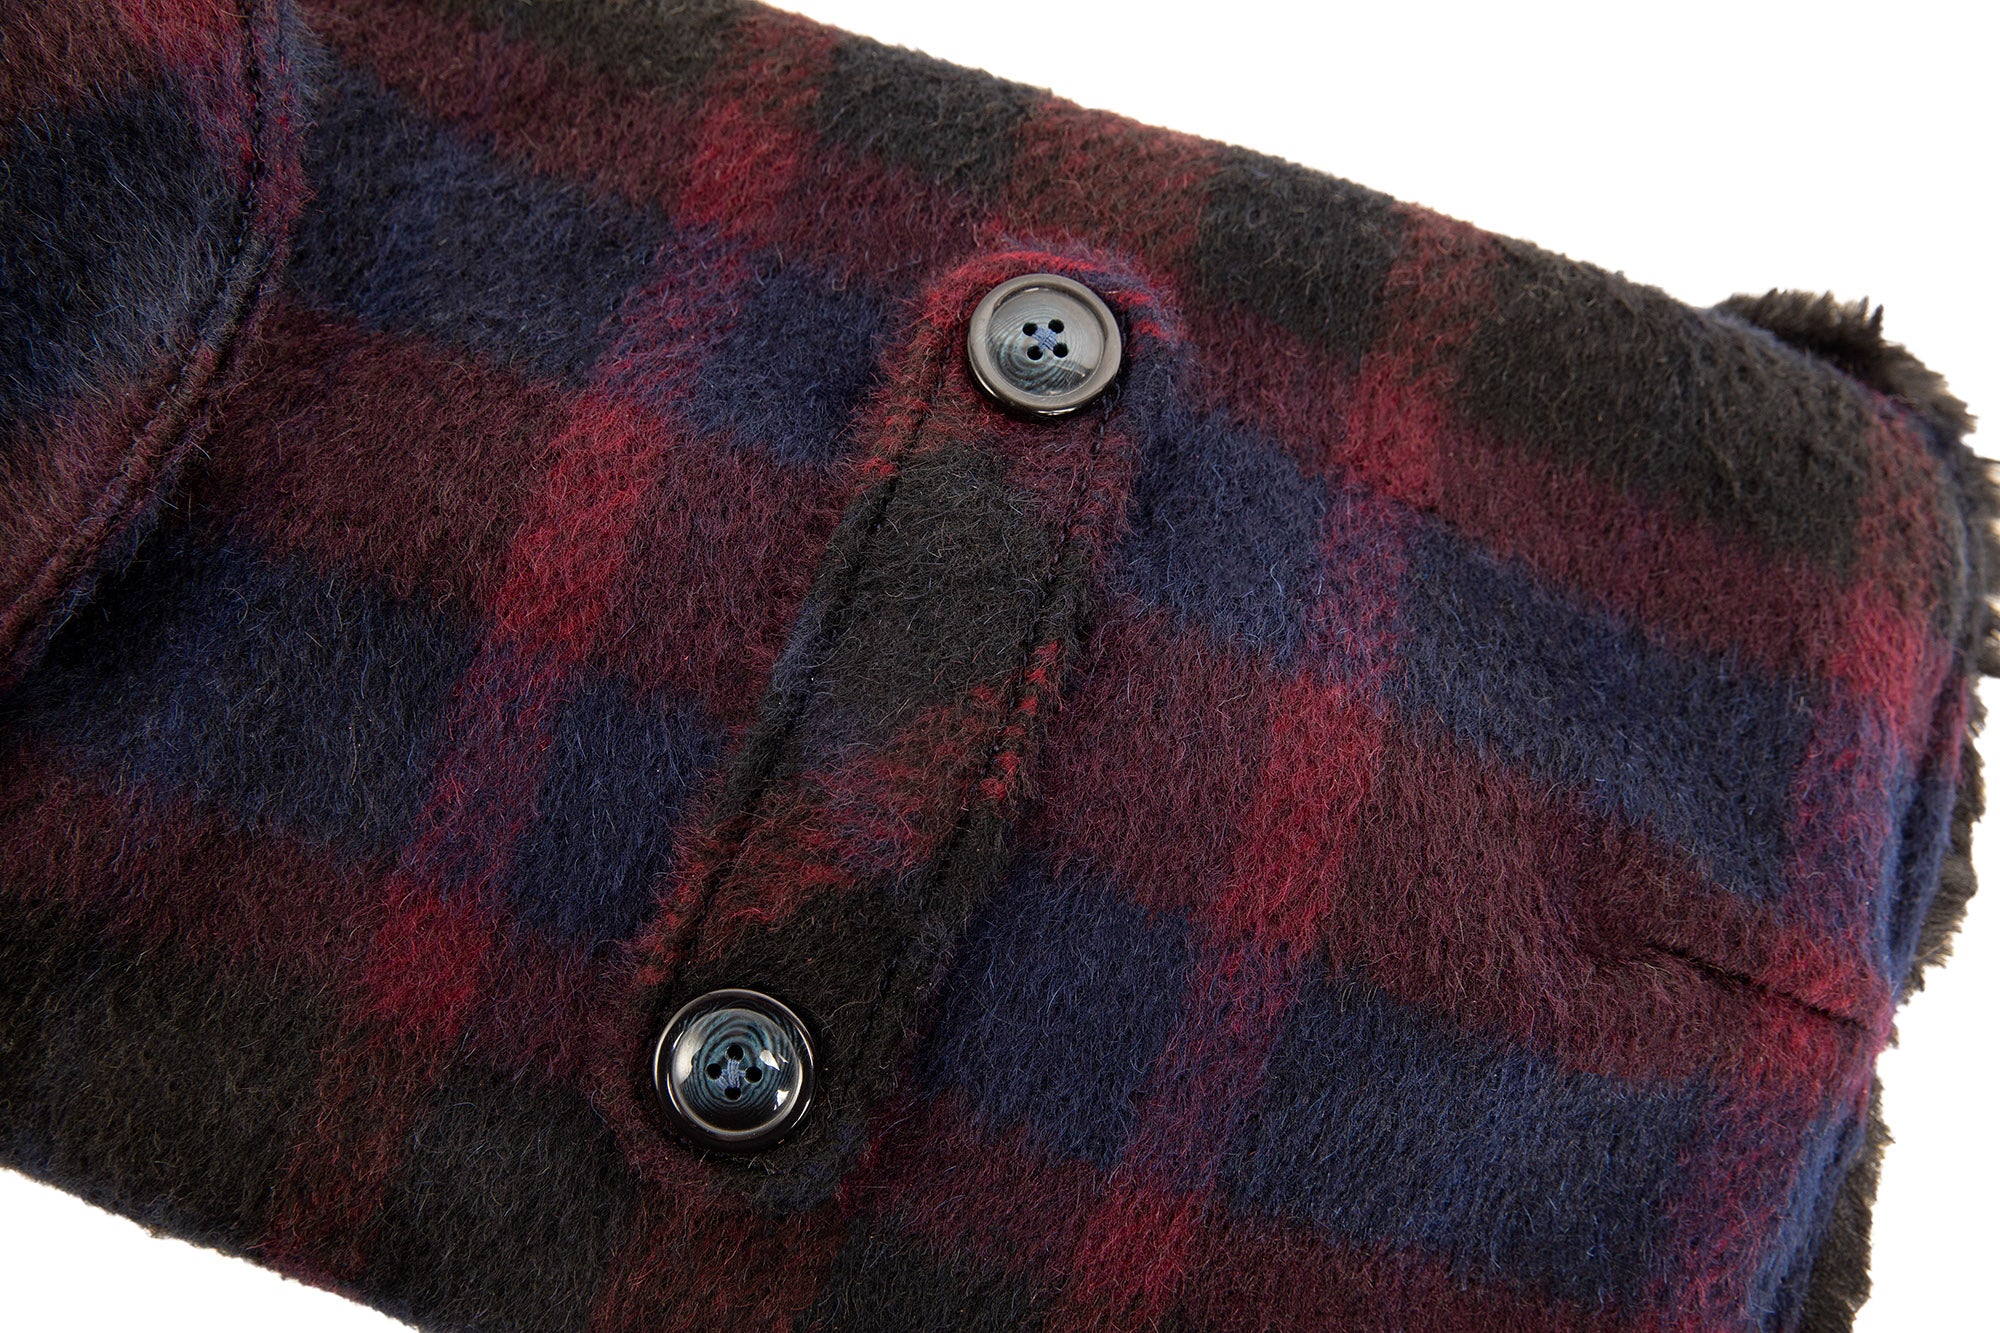 Couture Wool Dog Coat - Navy & Burgundy